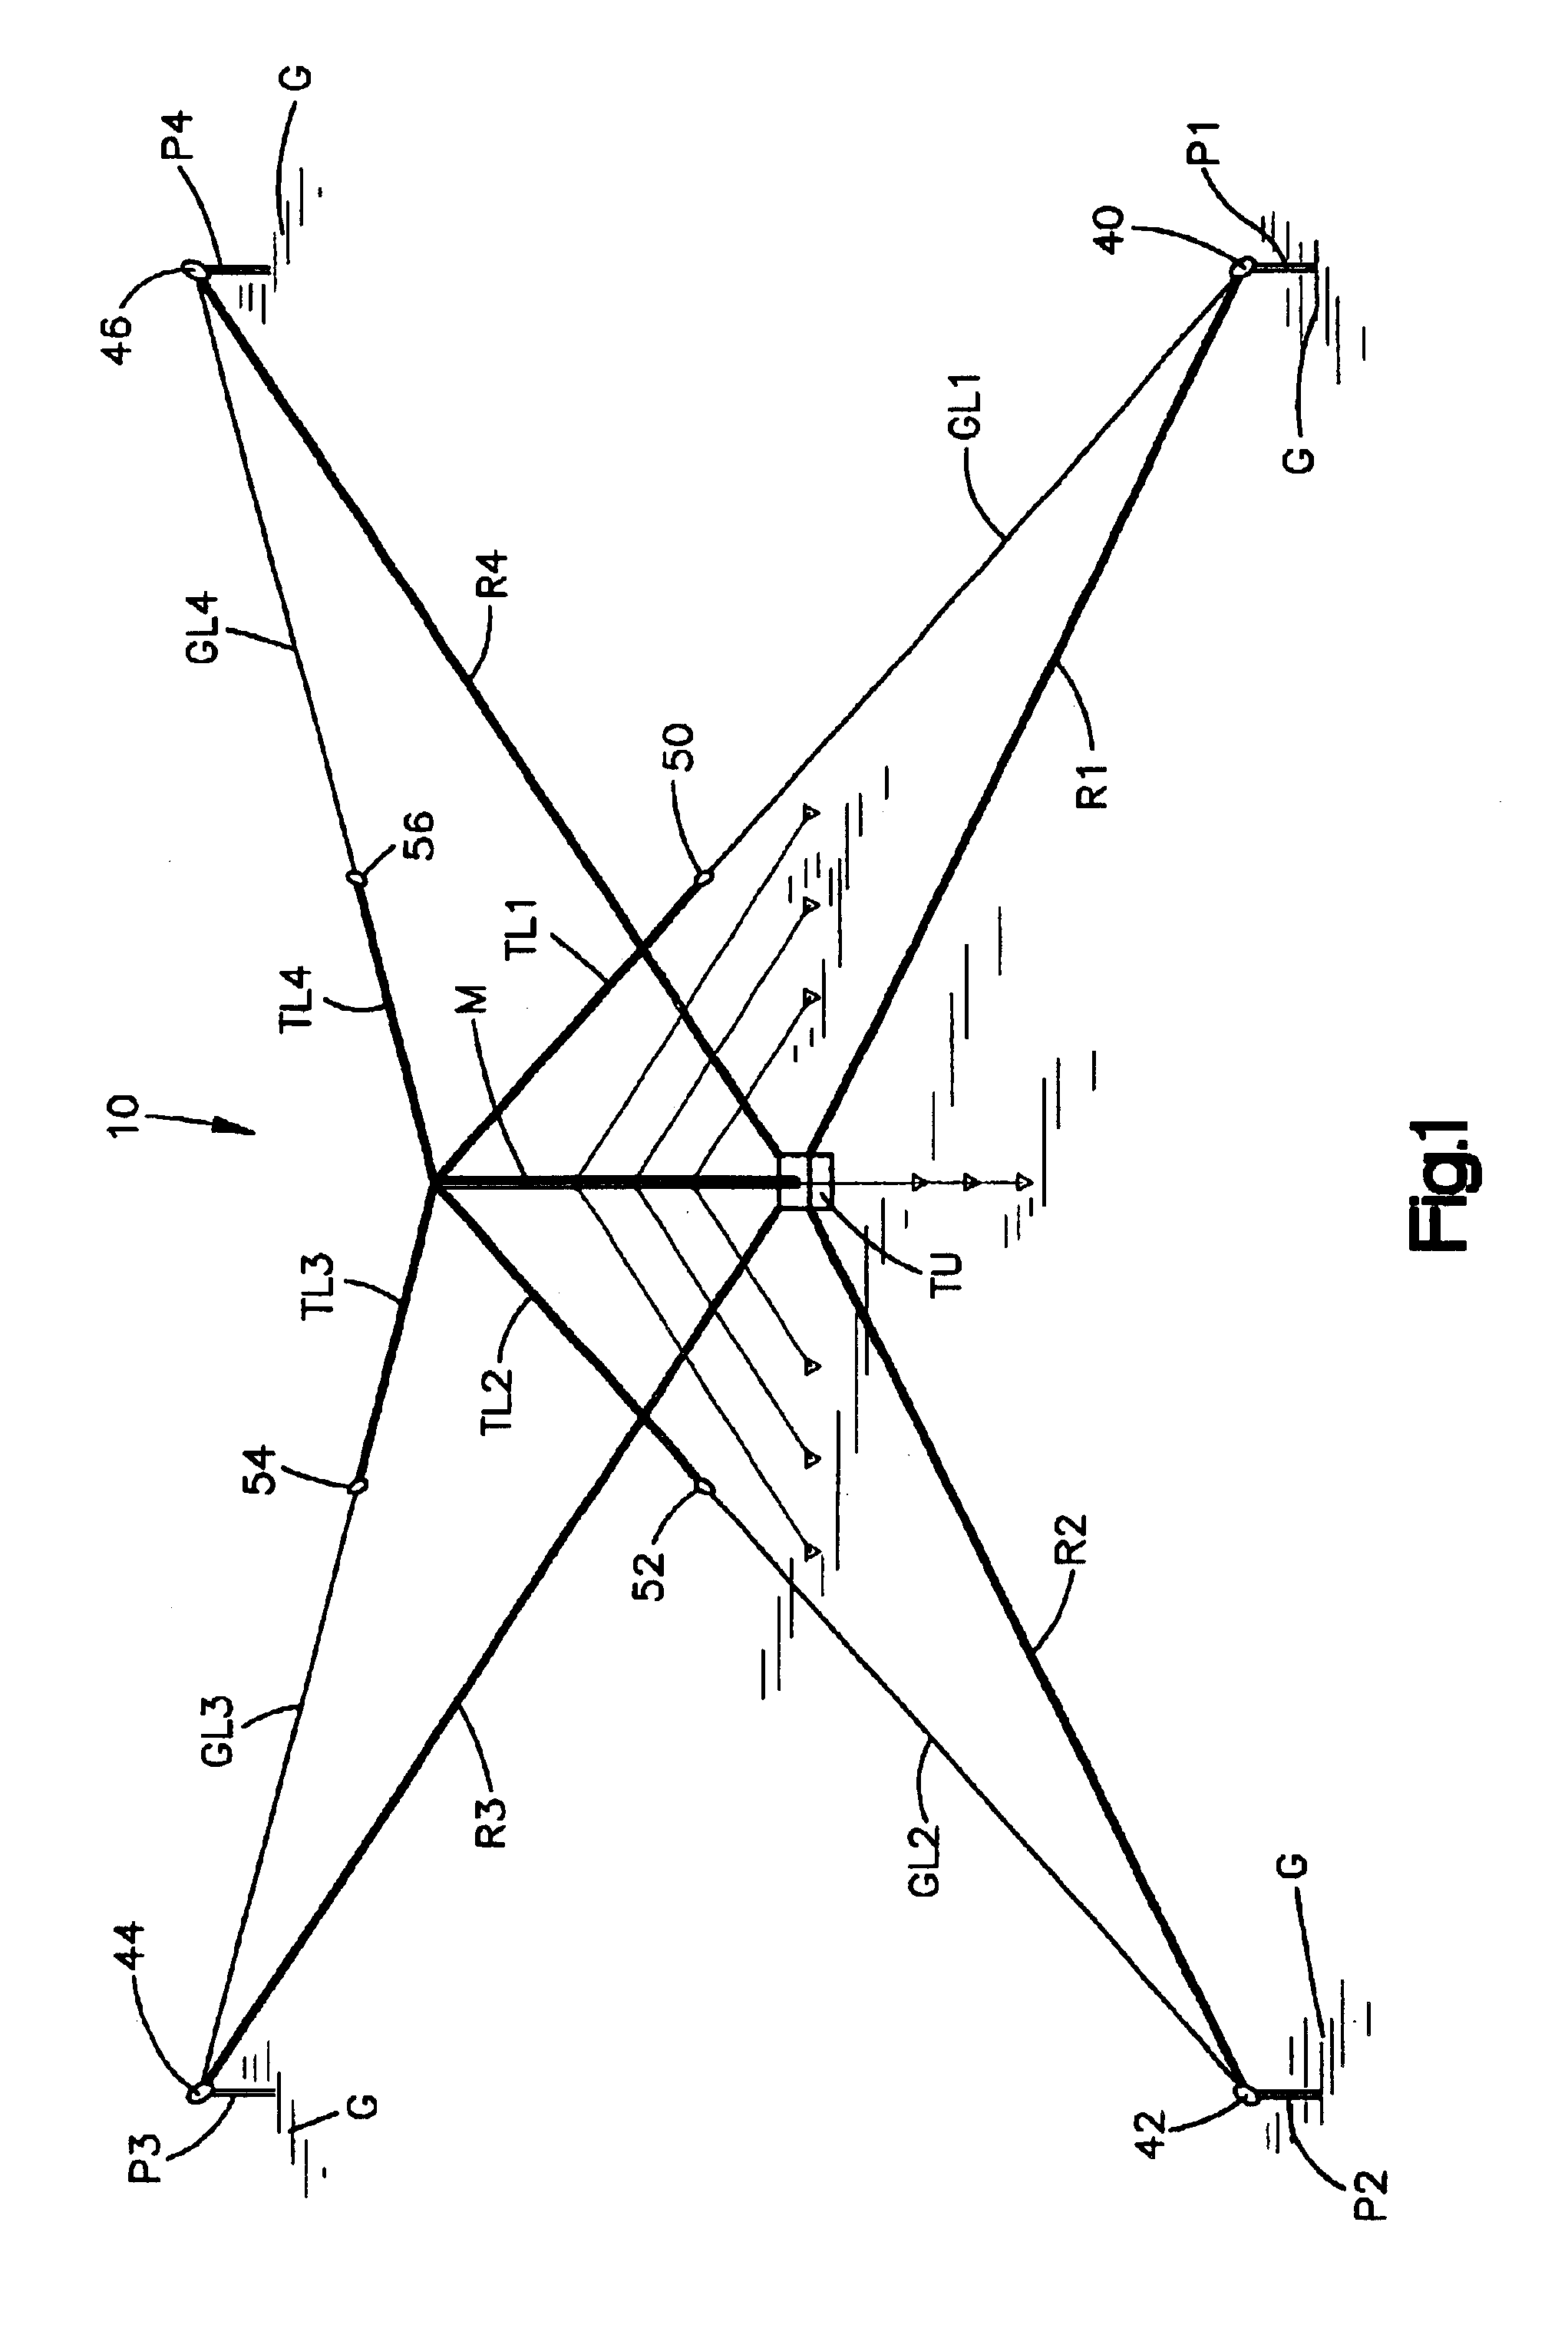 Antenna system utilizing elevated, resonant, radial wires